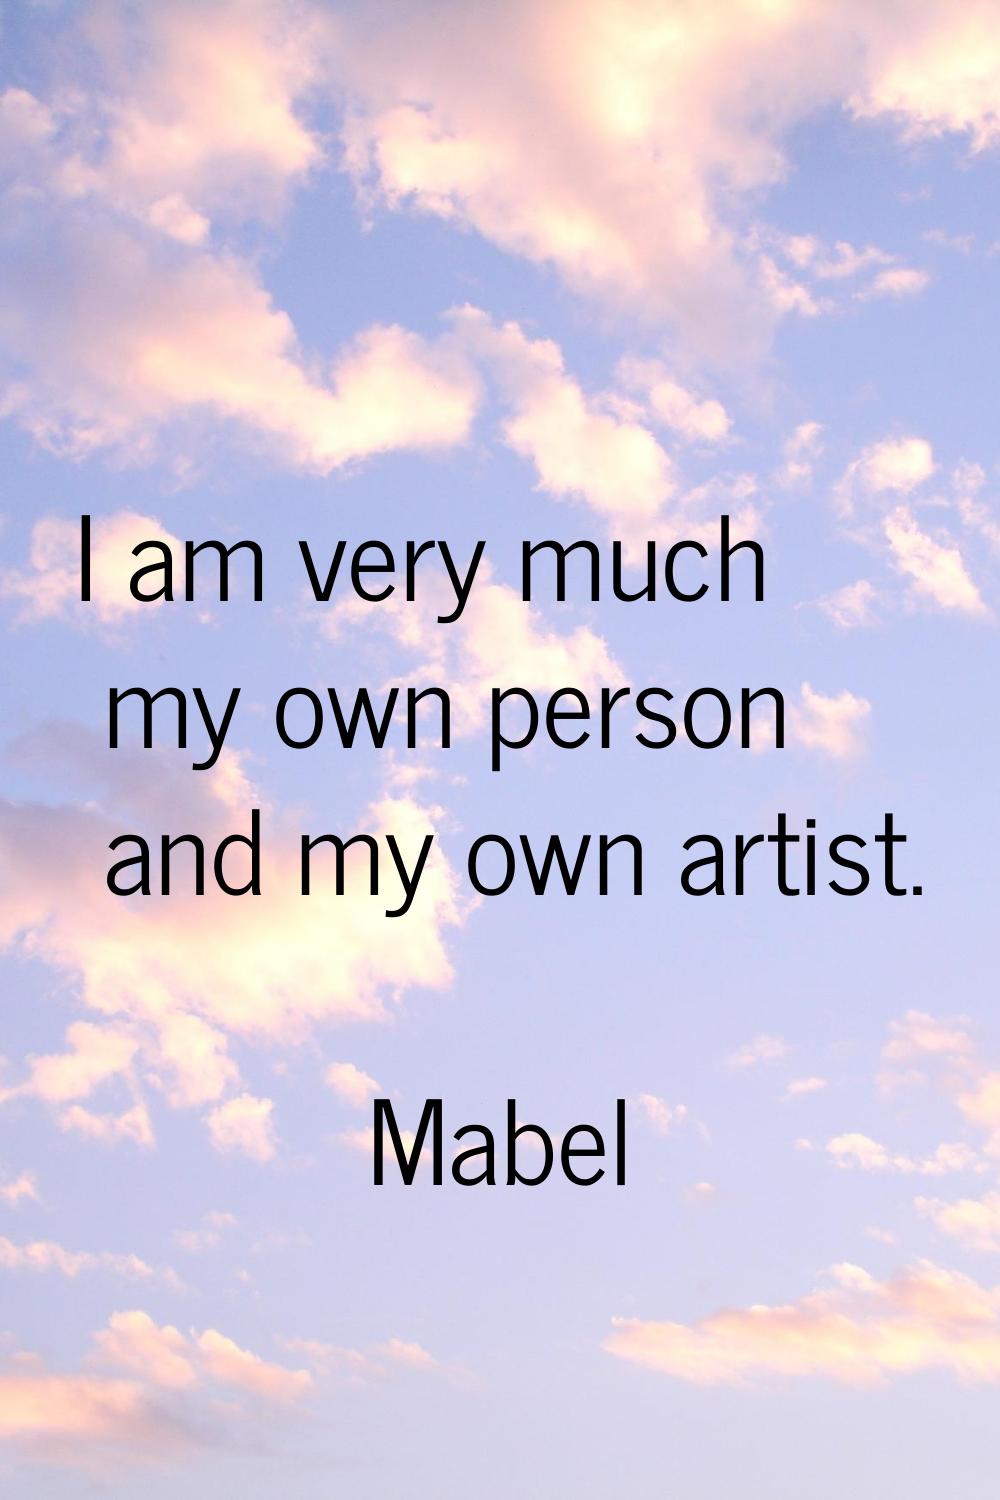 I am very much my own person and my own artist.